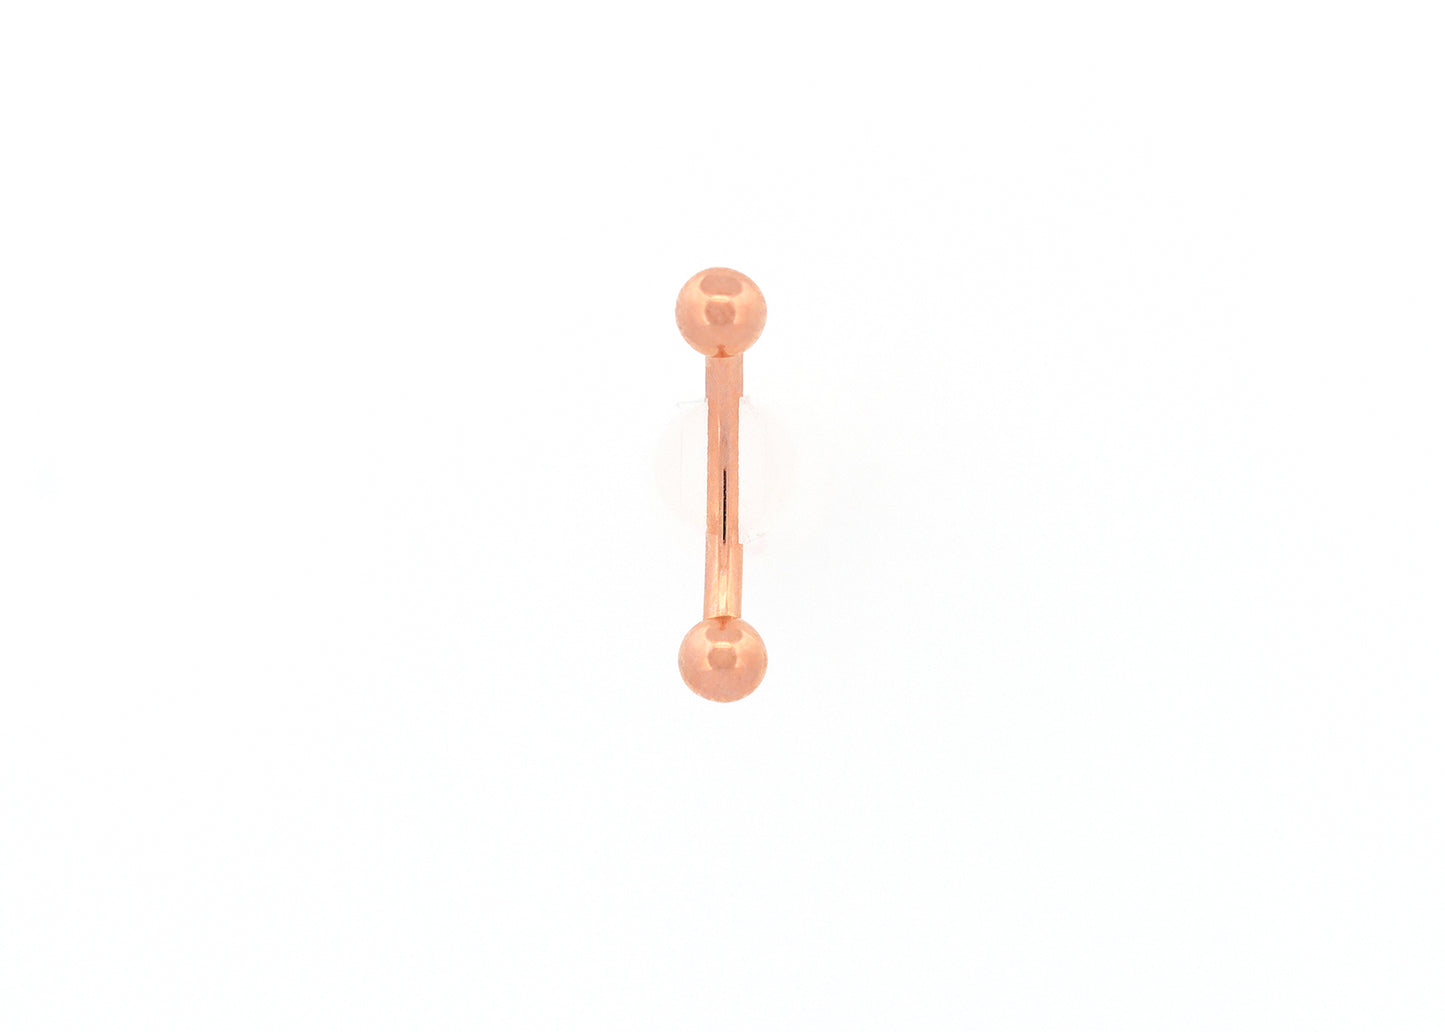 16g 14K Gold Curved Barbell